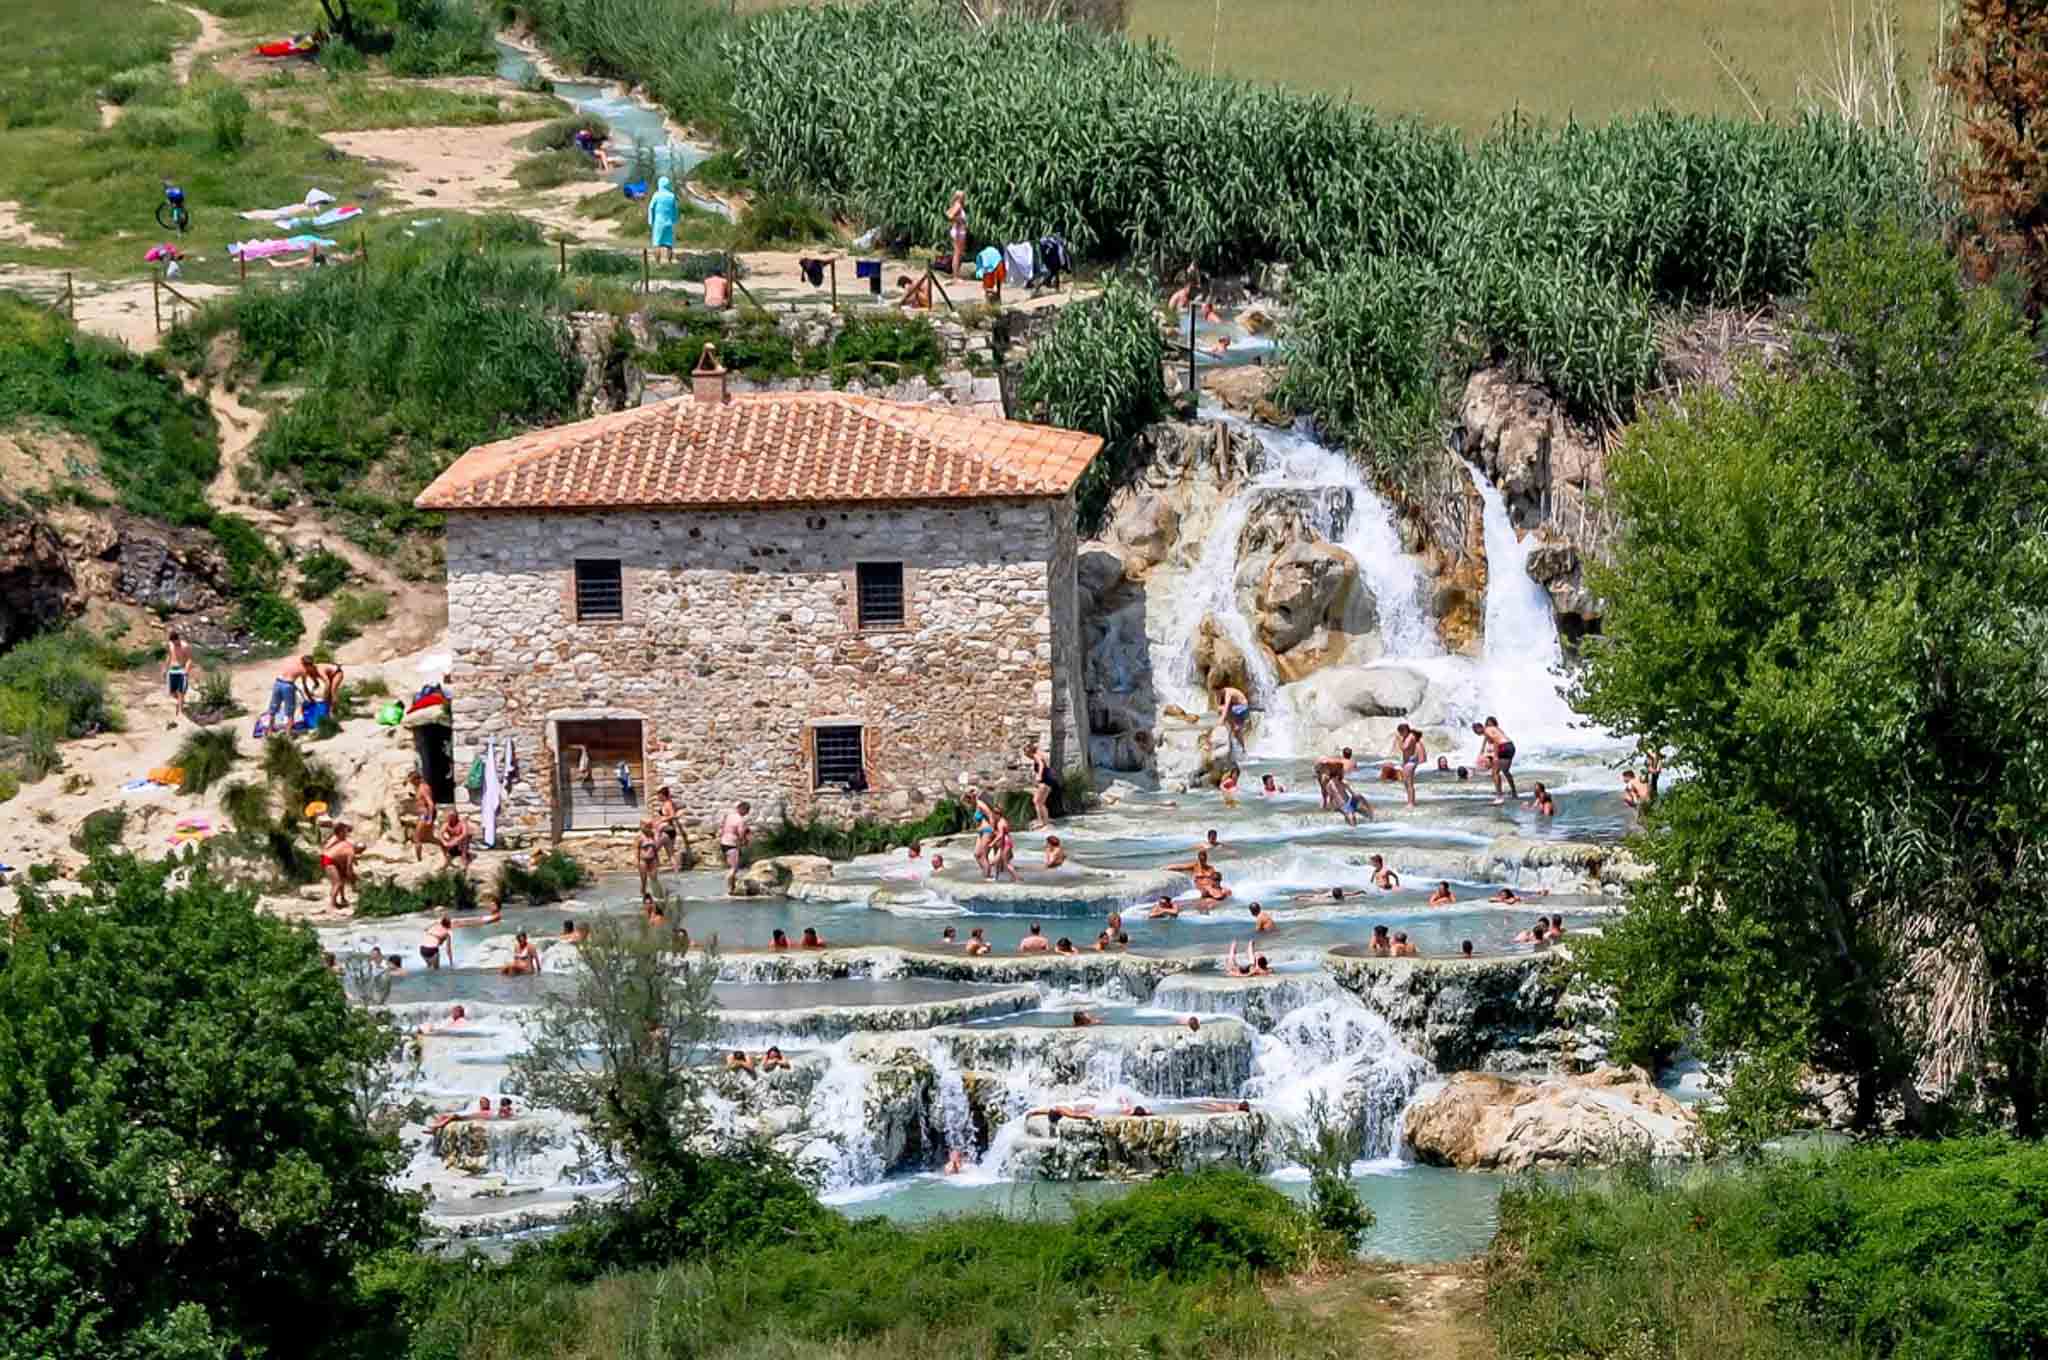 People at a natural hot springs complex with cascading pools